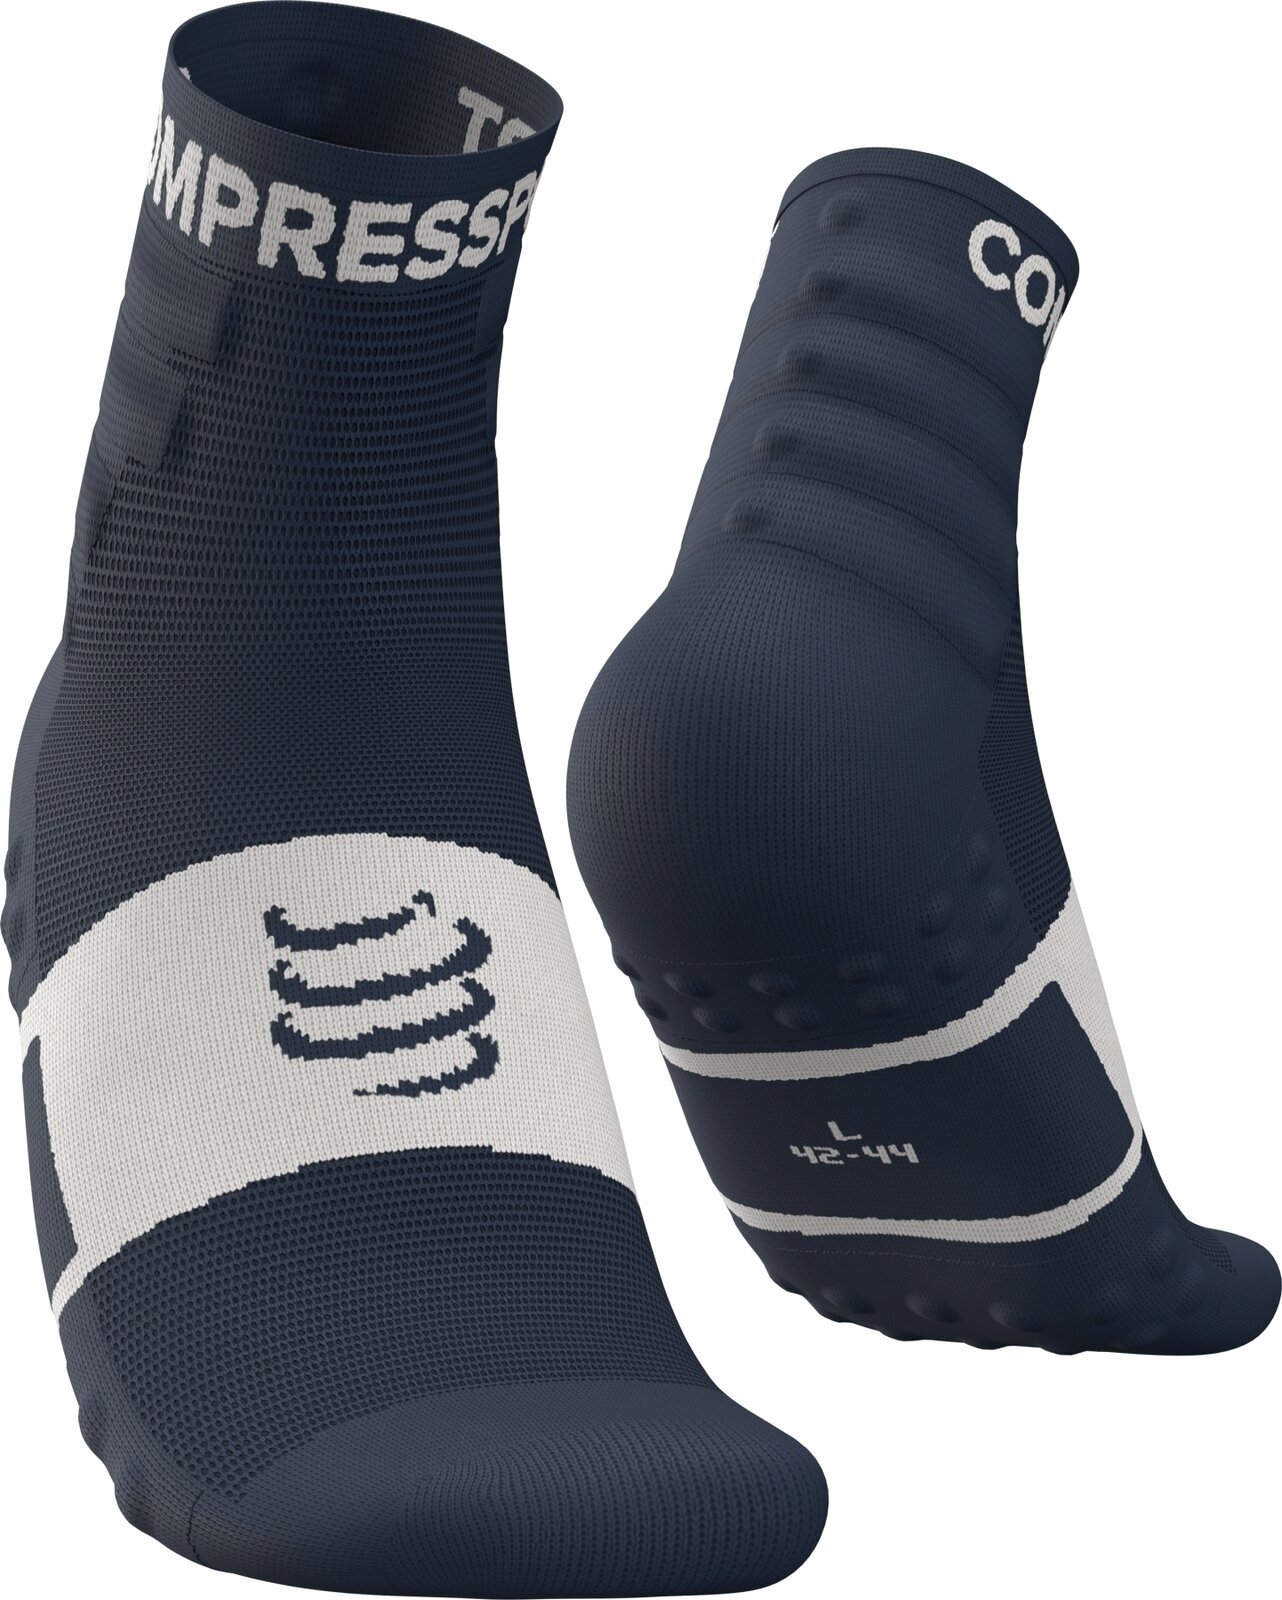 Calcetines para correr Compressport Training Socks 2-Pack Dress Blues/White T4 Calcetines para correr